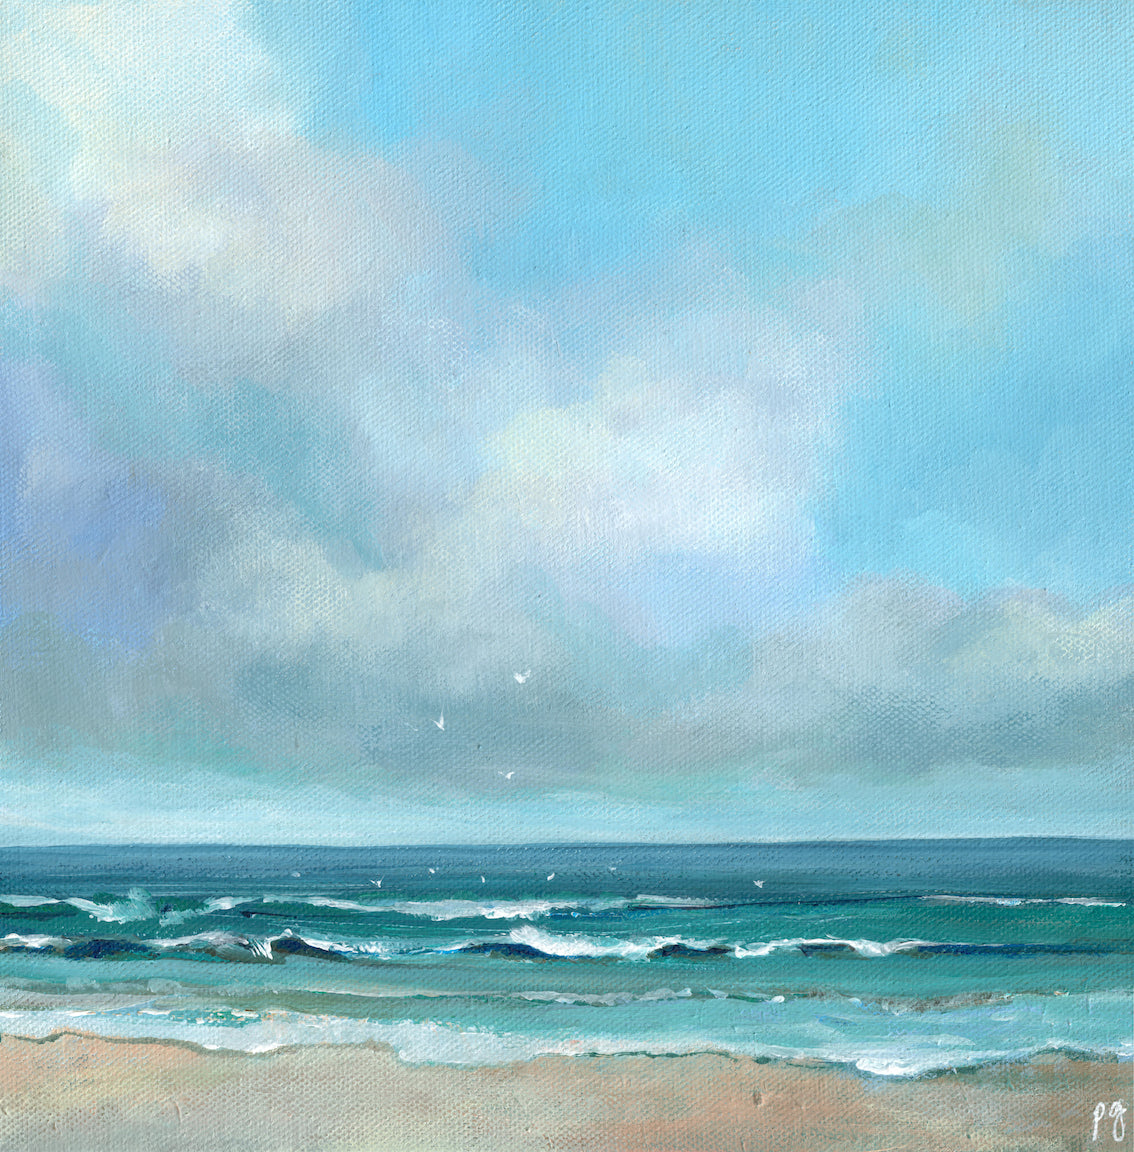 Irish seascape painting | The call of the sea | Polly Gribben 10x10in